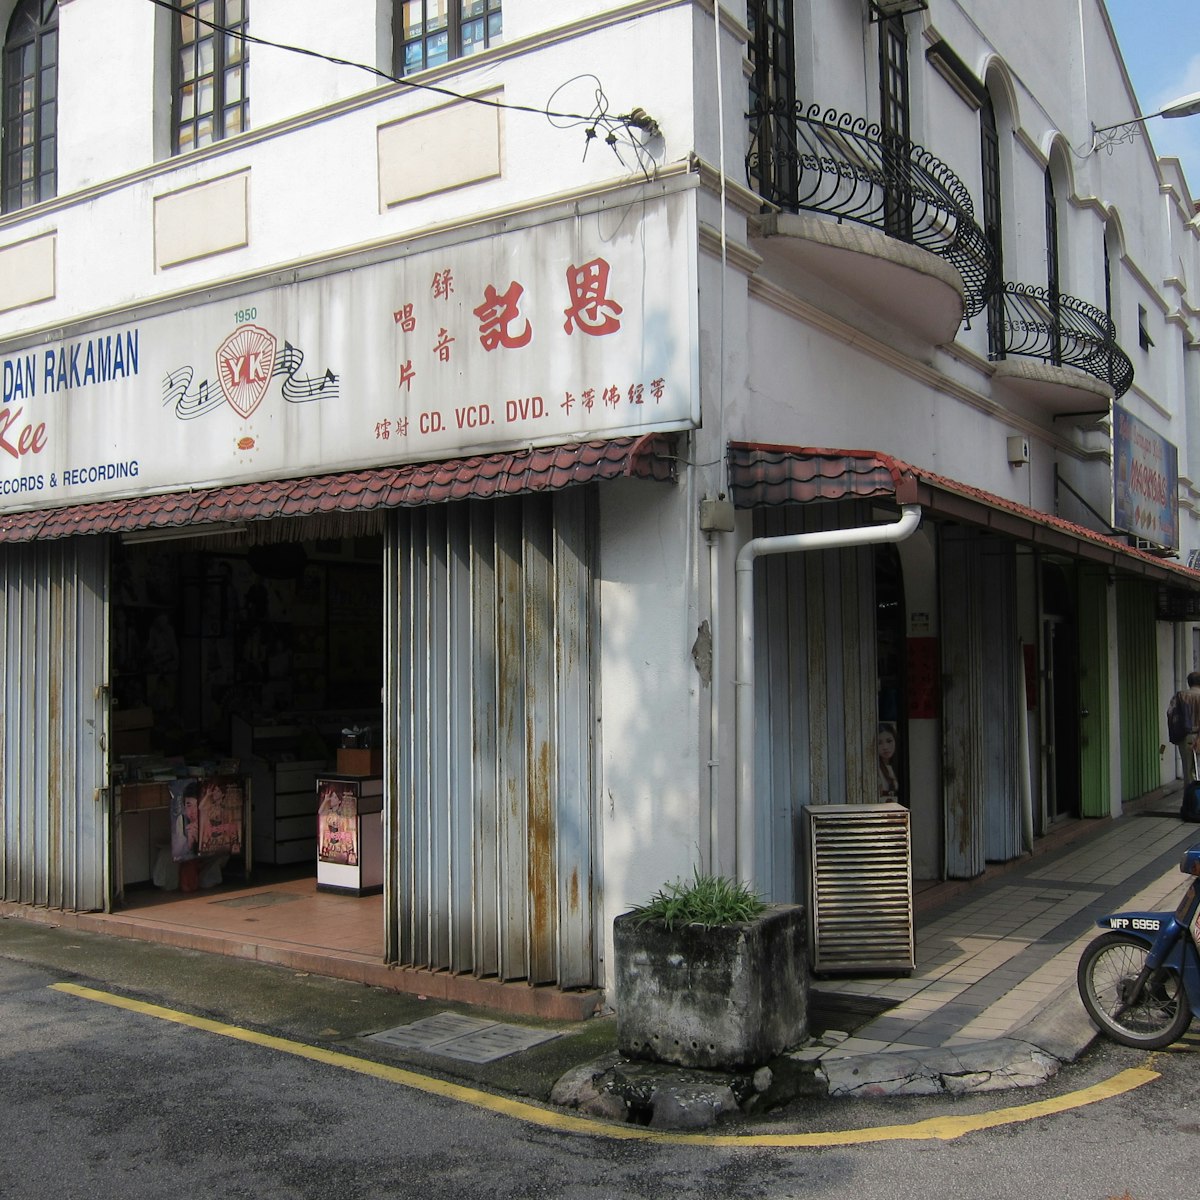 Yan Kee Records & Recording. Yan Kee is set in an old building just opposite the Sri Mahamariamman Temple in Chinatown